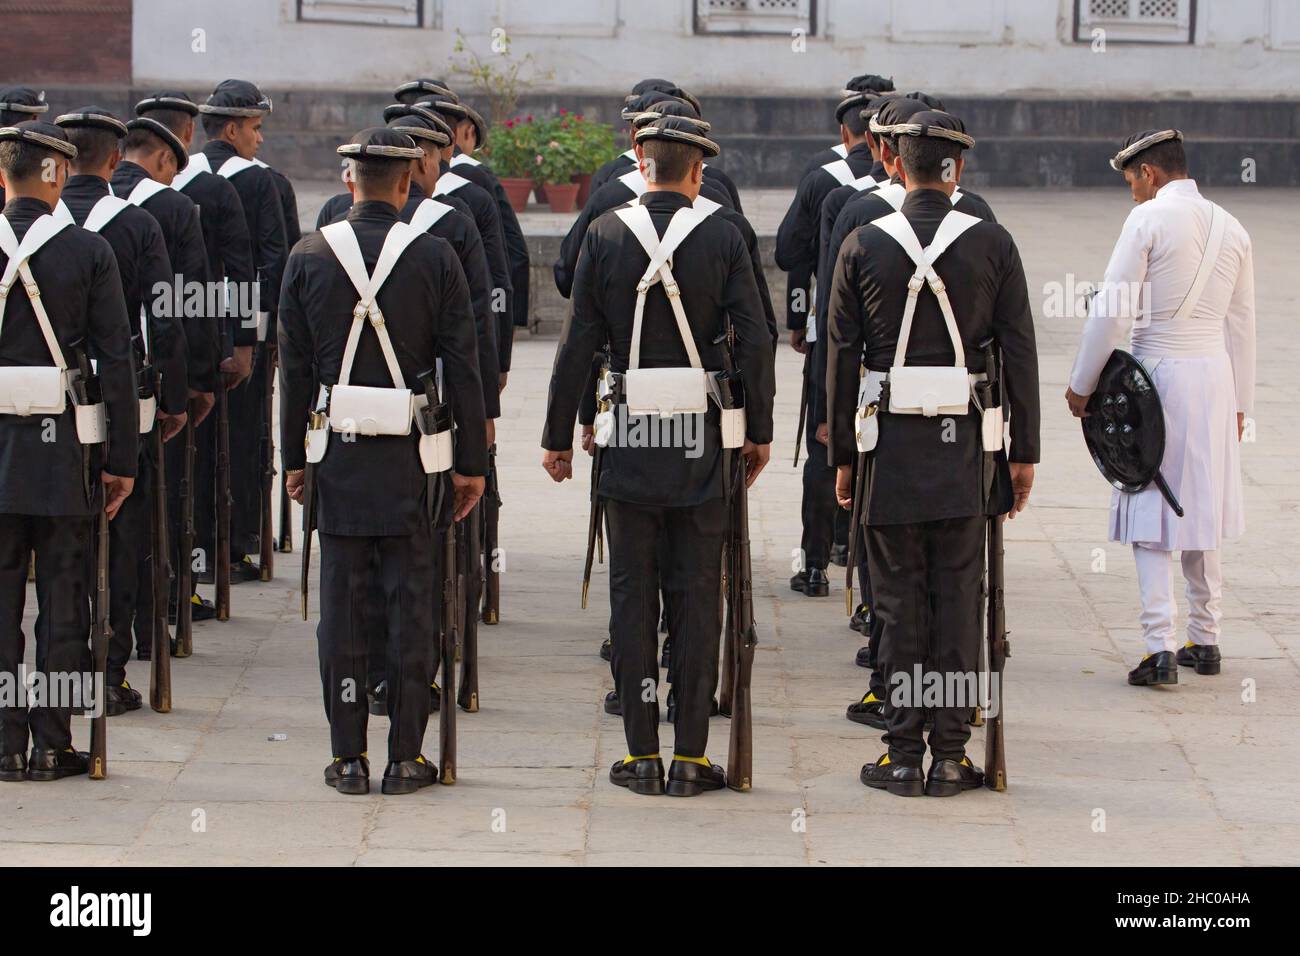 The Gurkha troop commander inspects his soldiers before ceremonial duty at the Hanuman Dhoka Palace, Kathmandu, Nepal.  These soldiers perform ceremon Stock Photo